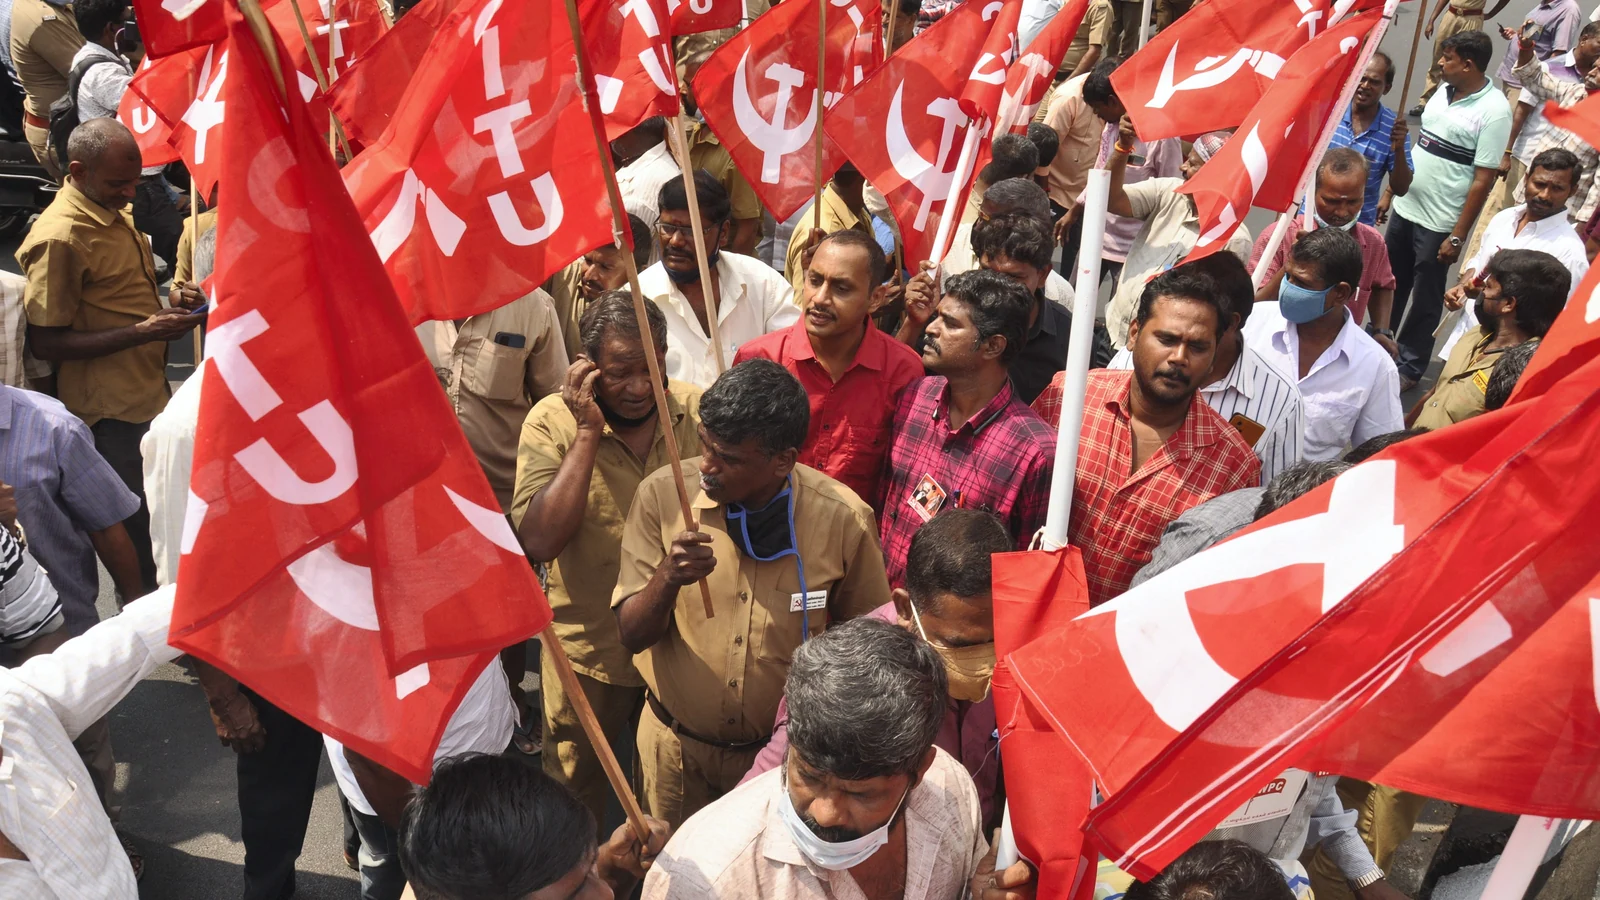 Terms of Trade | What explains the predicament of the trade unions in India?